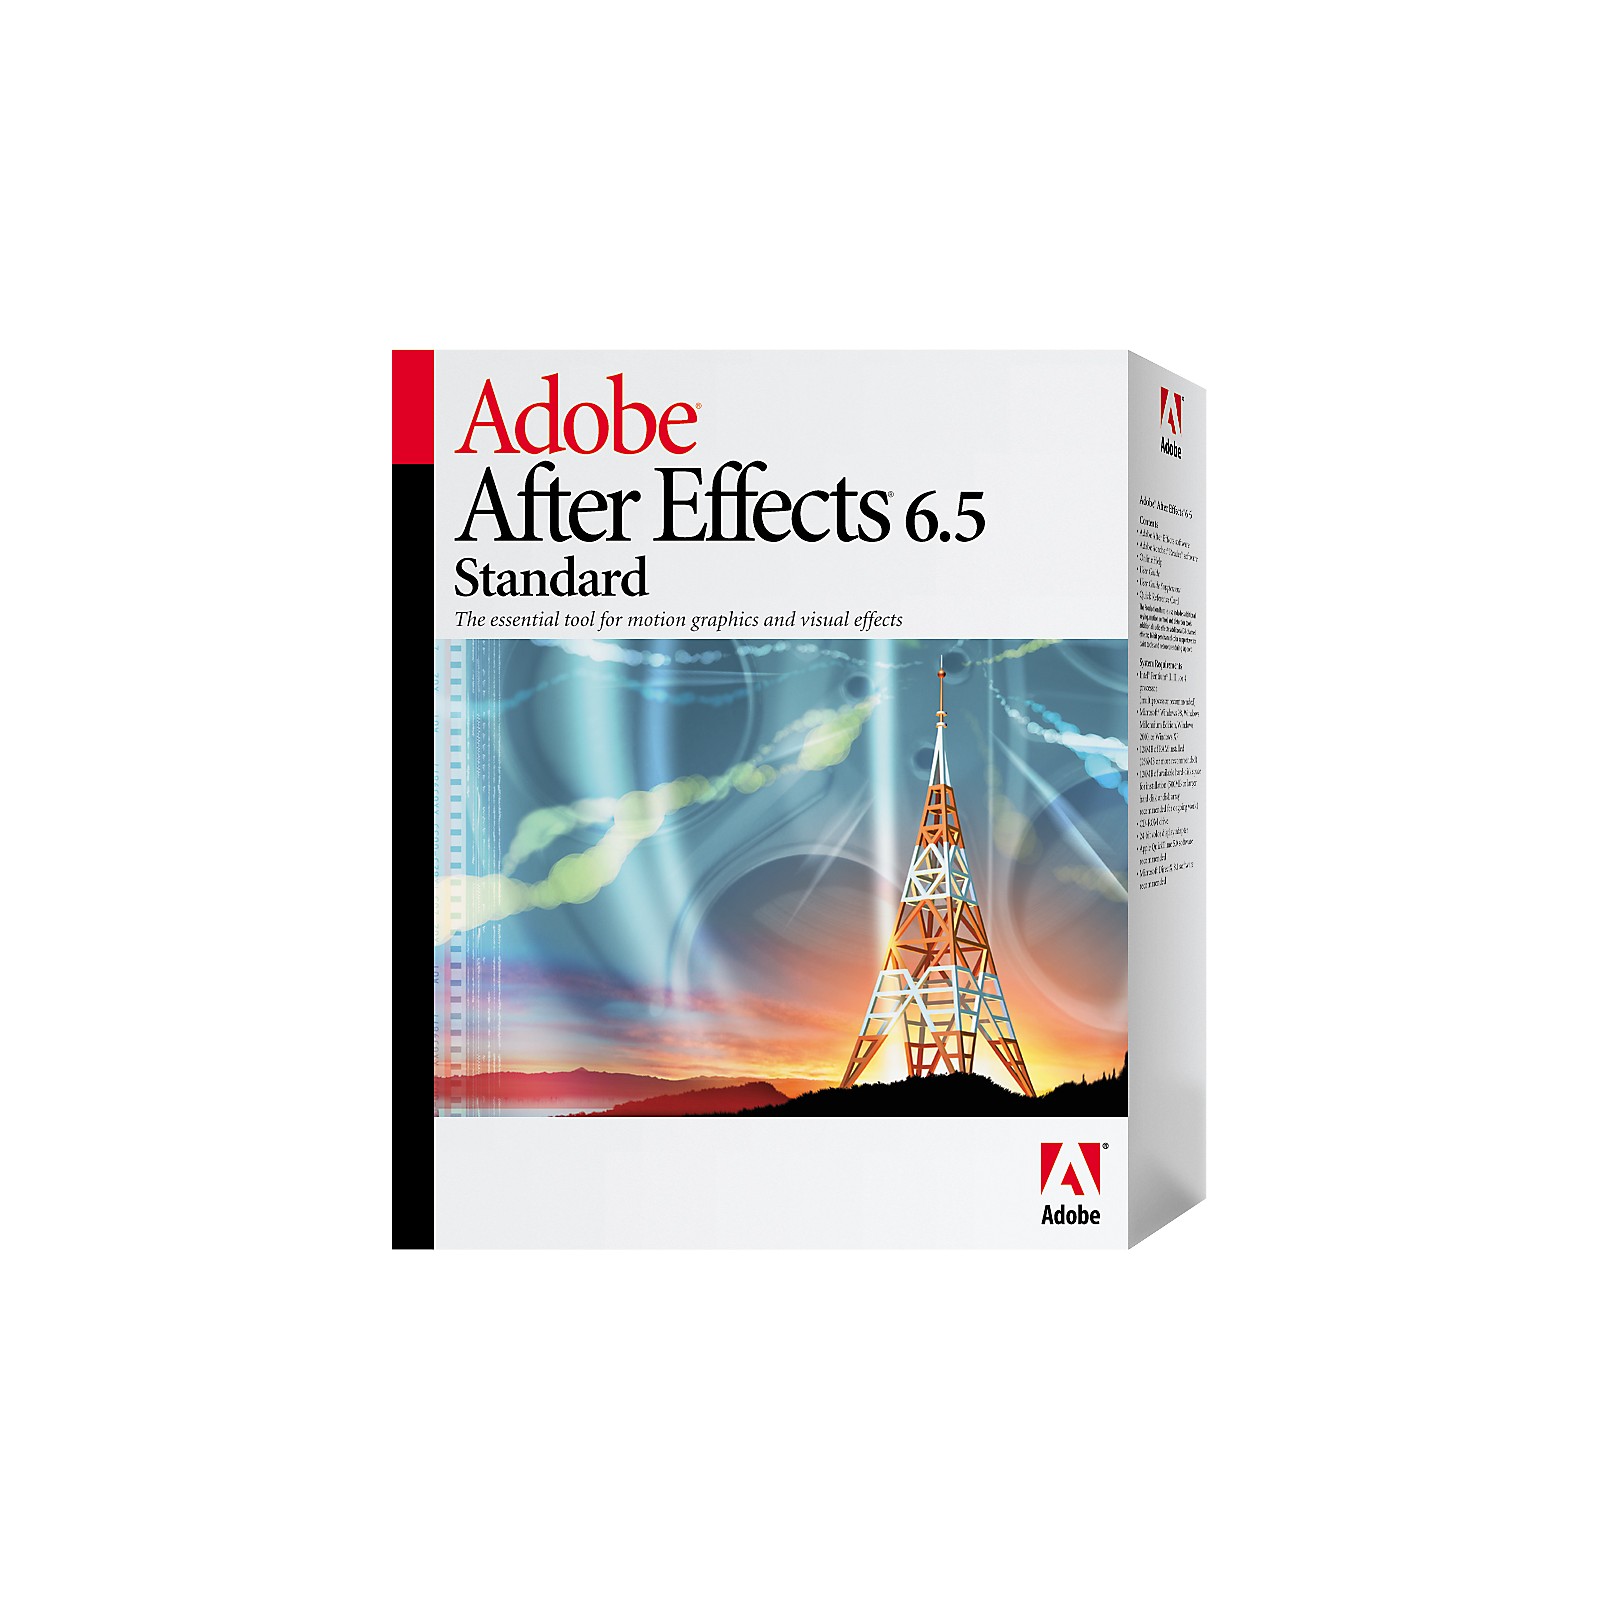 Adobe After Effect 6.5 Full Version